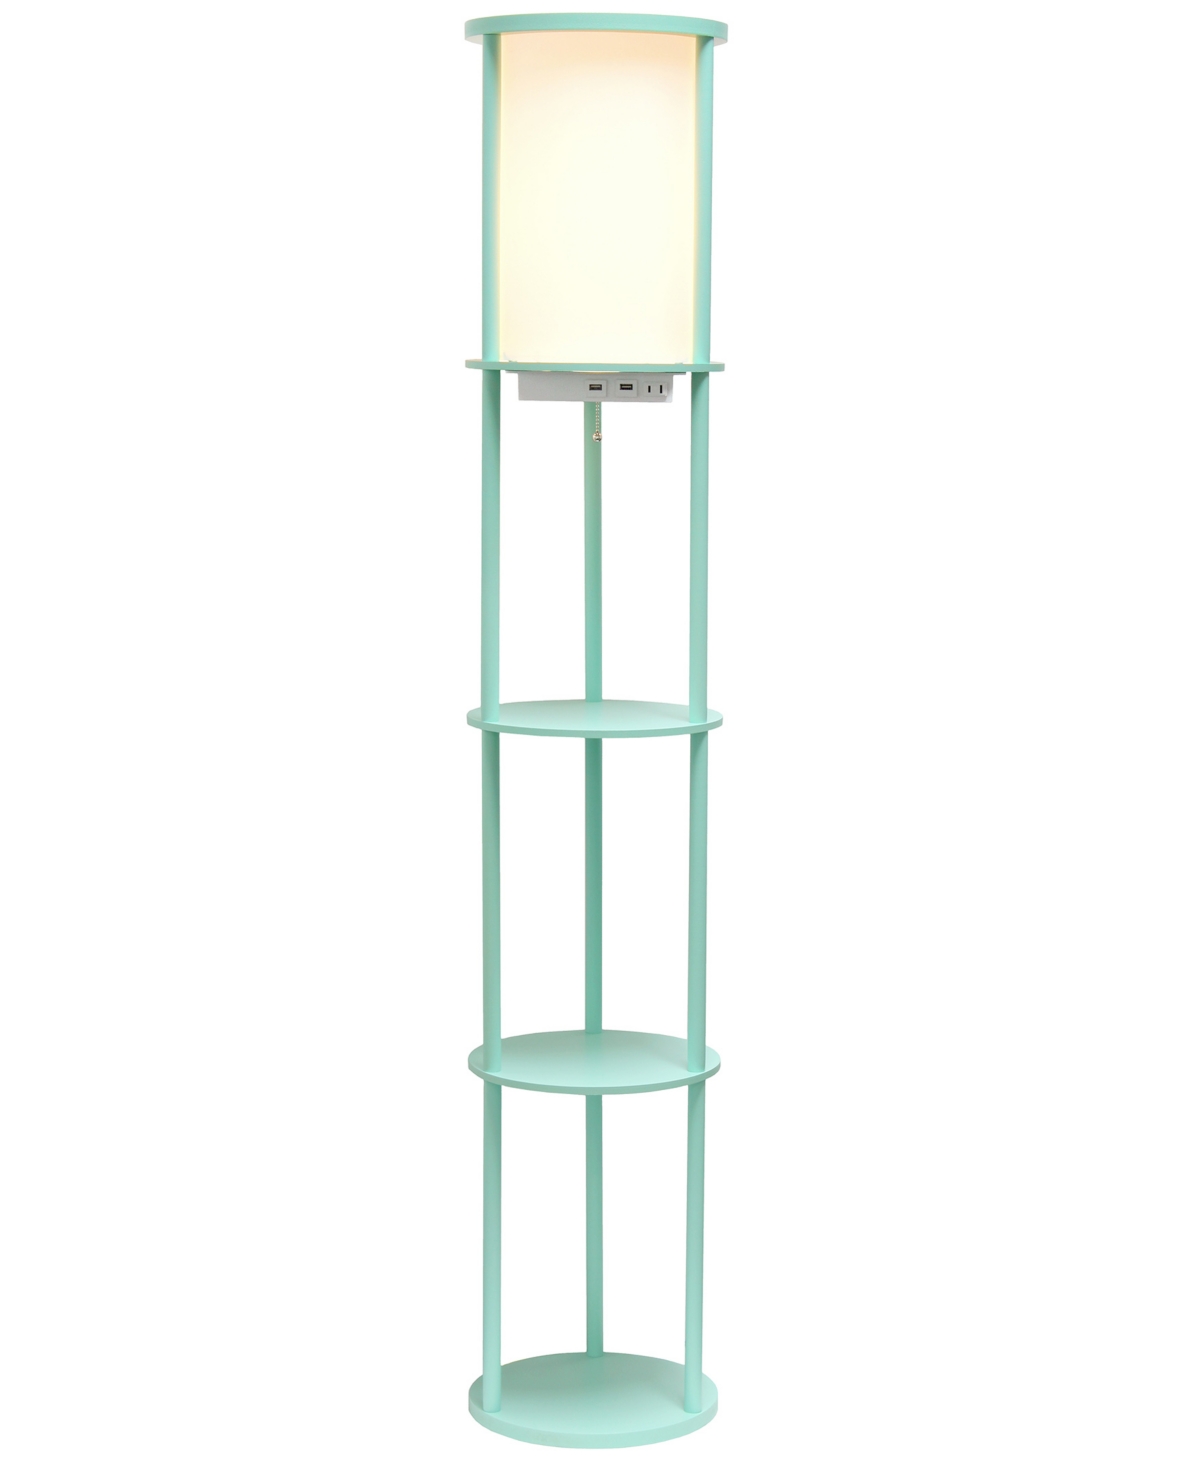 All The Rages Etagere Organizer Storage Floor Lamp With 2 Usb Charging Ports, 1 Charging Outlet In Aqua